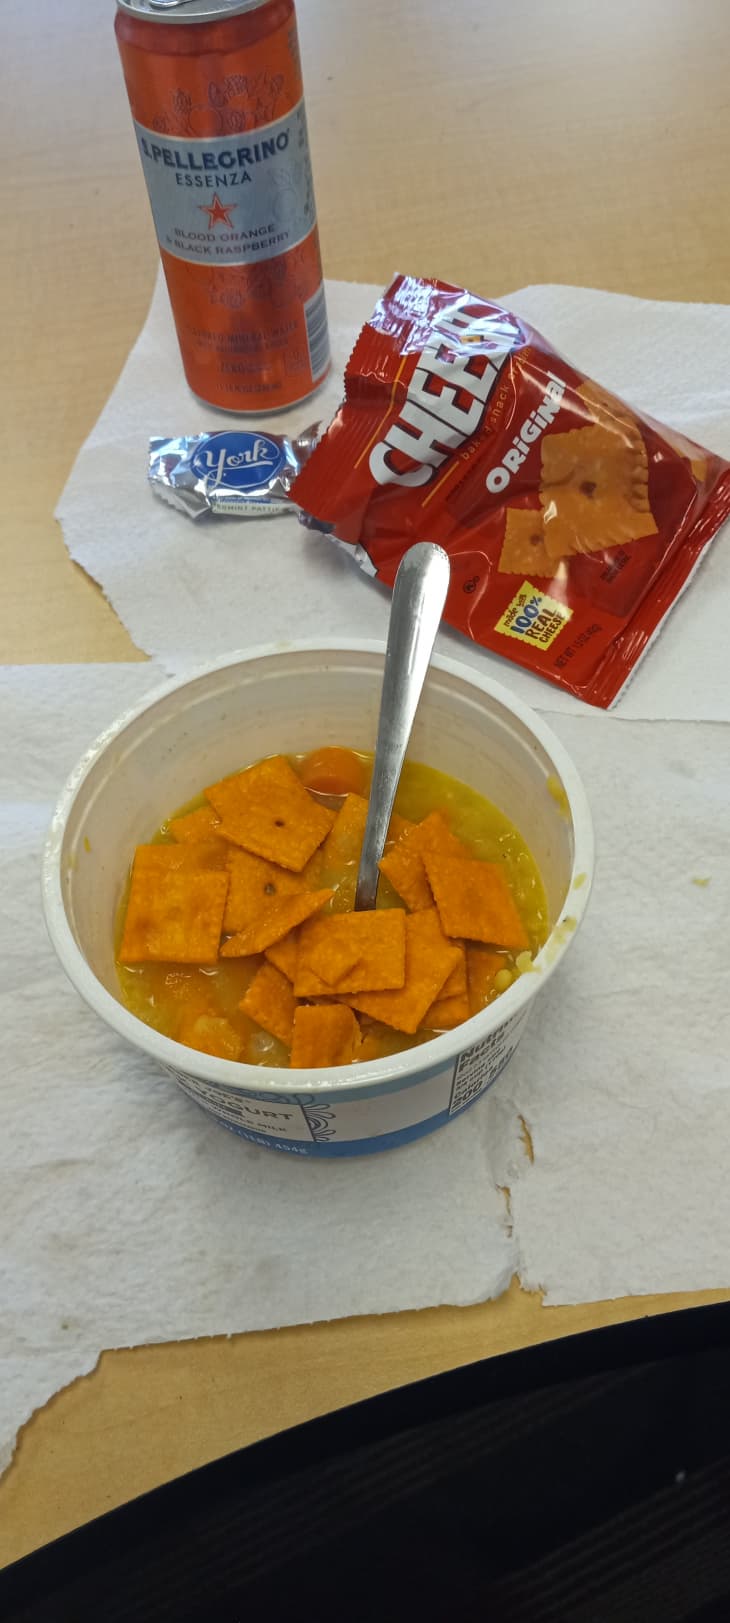 cheez-its on top of soup, Pellegrino